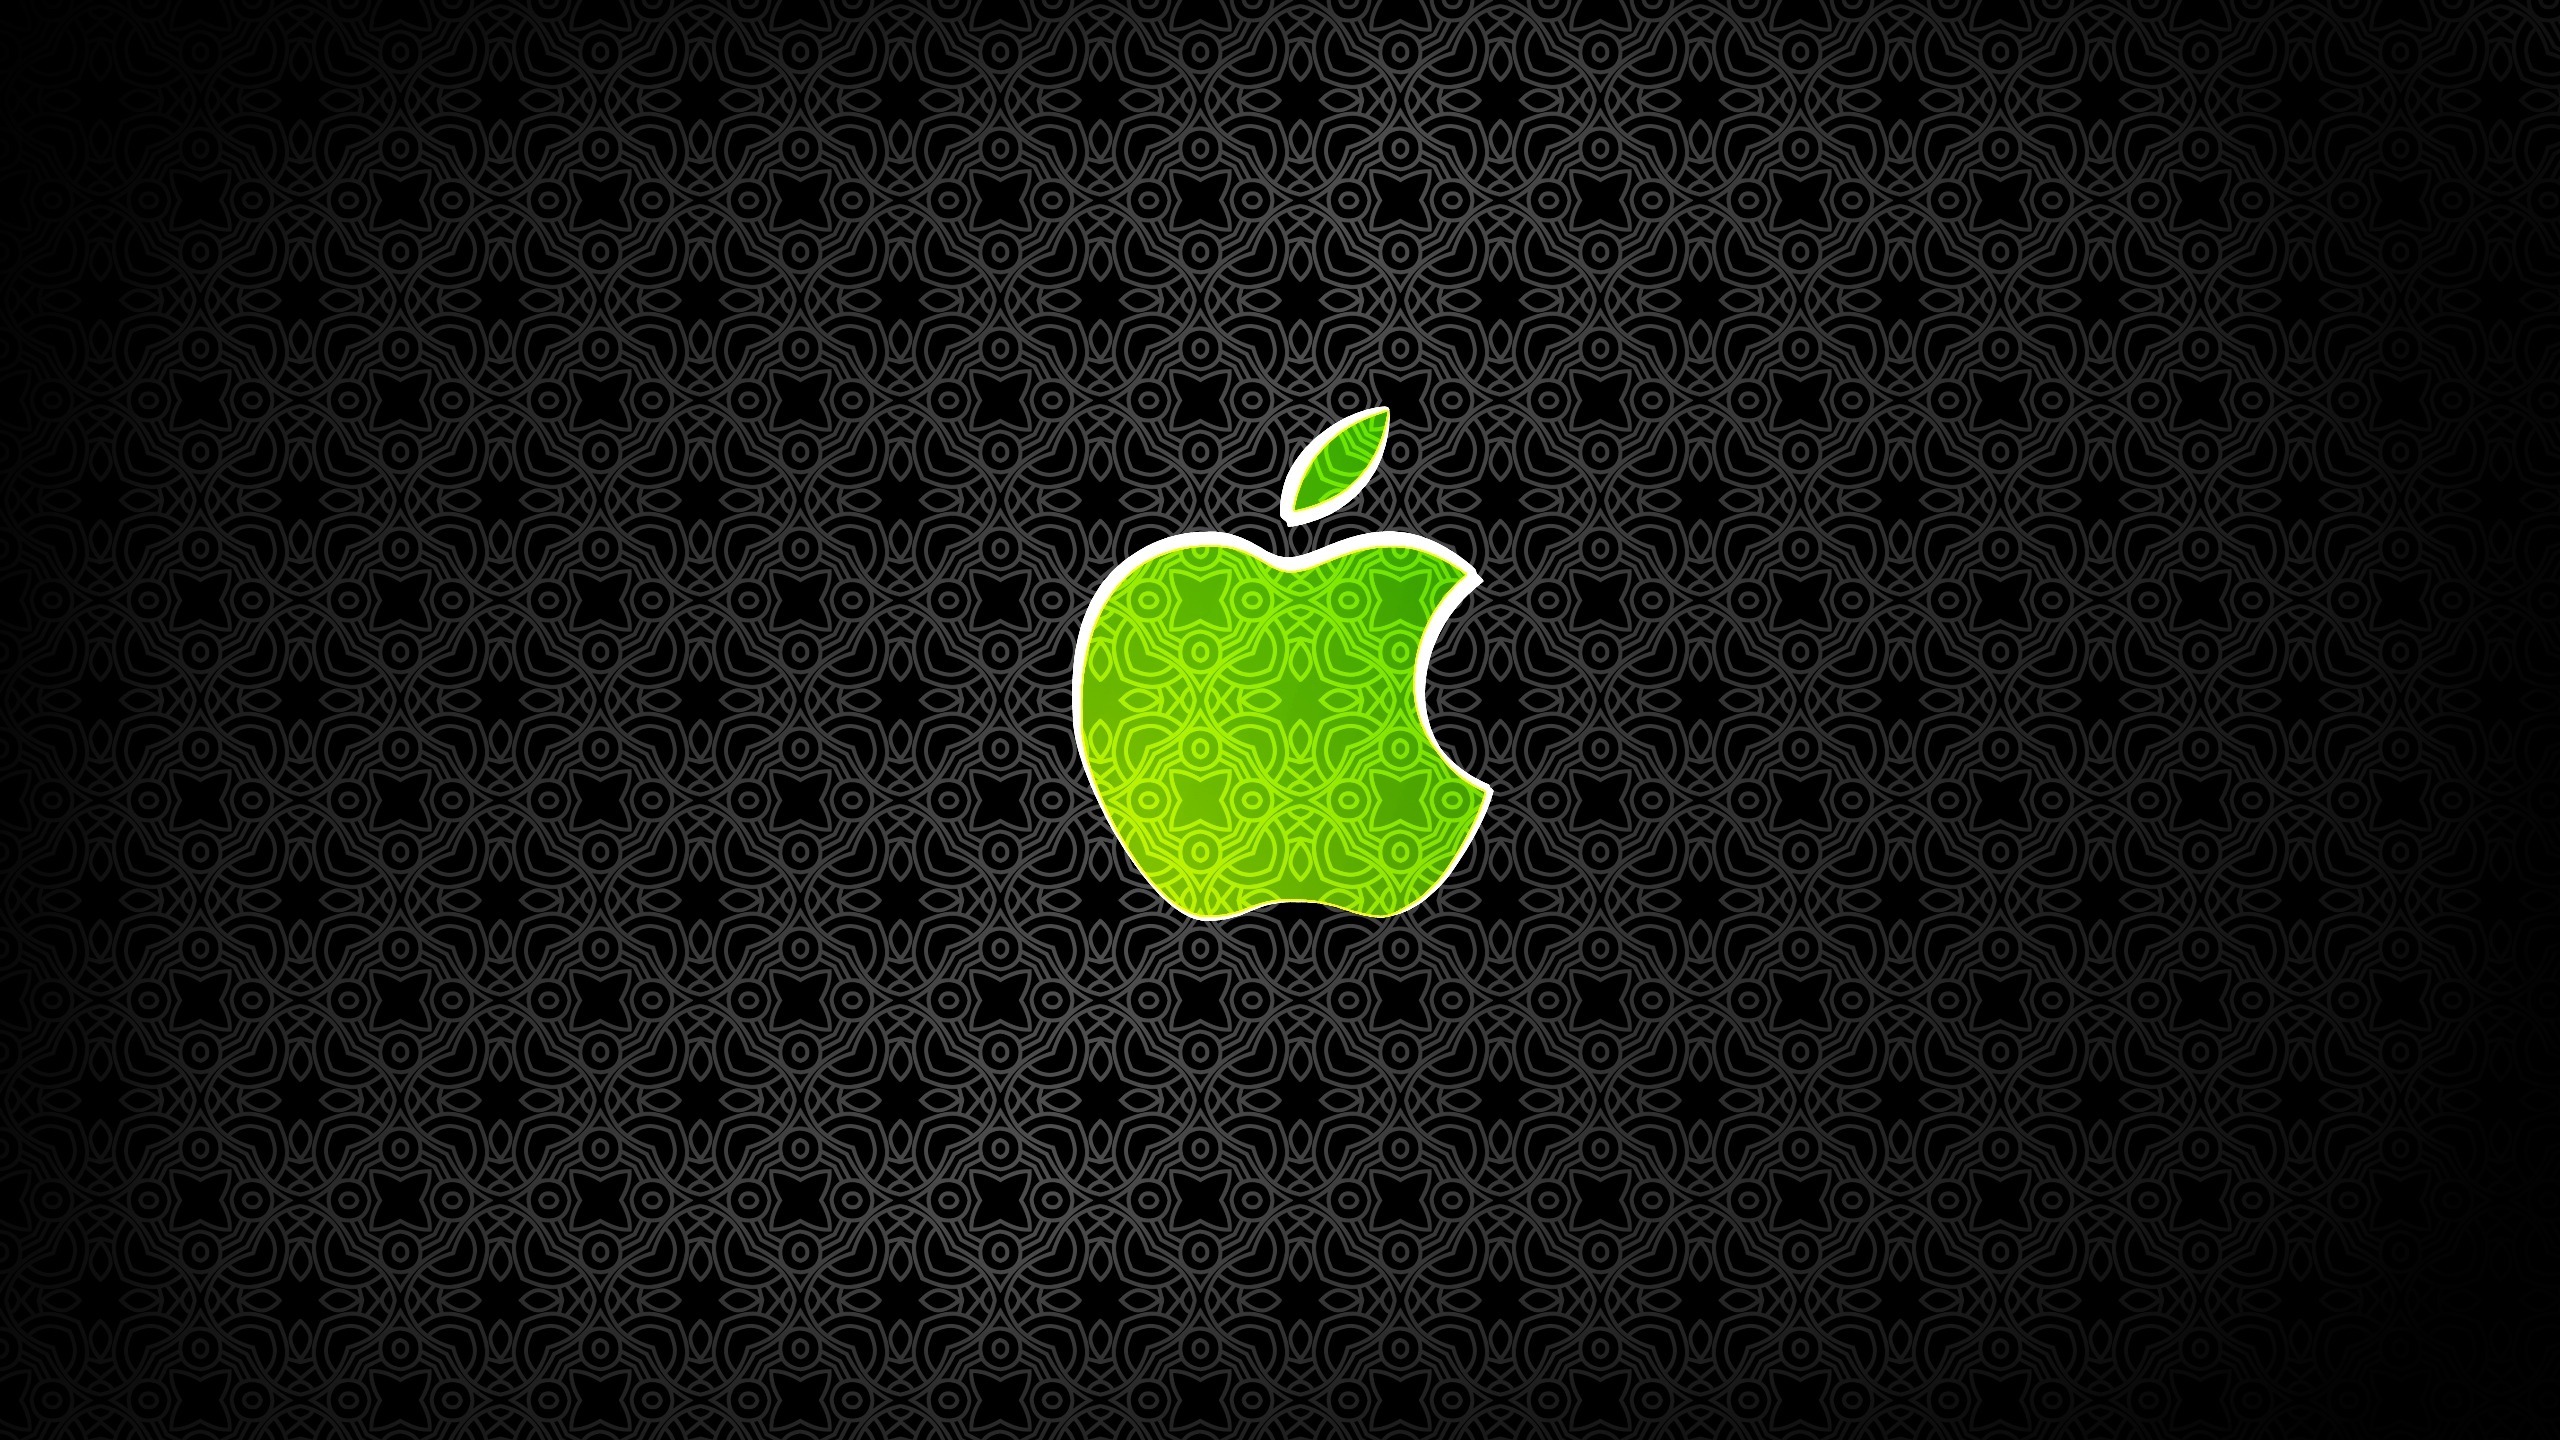 android logos, apple, brands, background, black